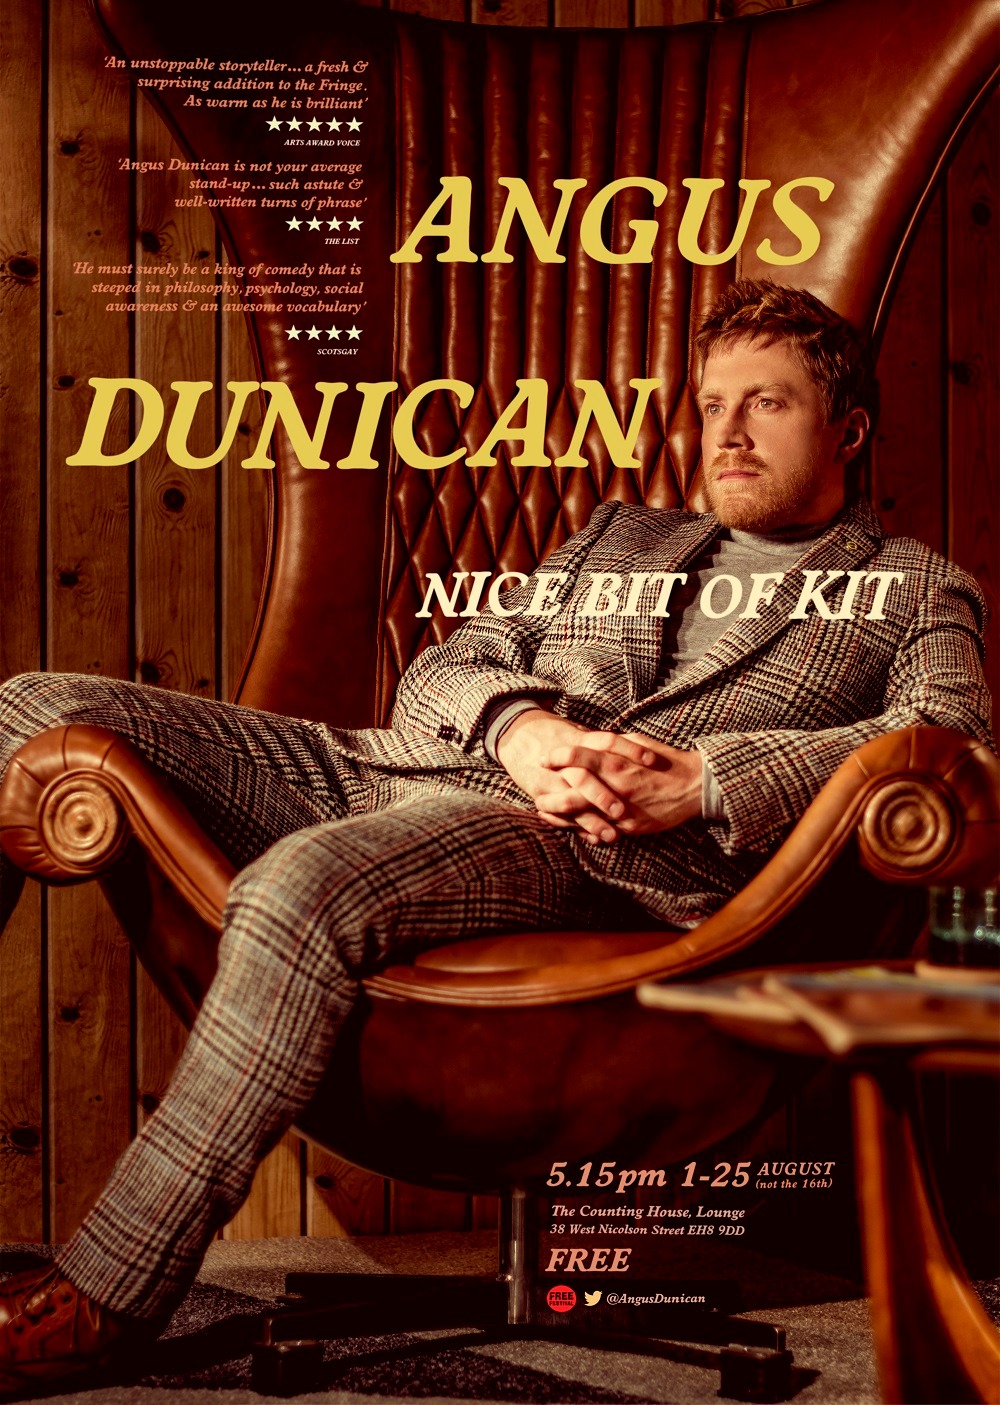 The poster for Angus Dunican: Nice Bit of Kit